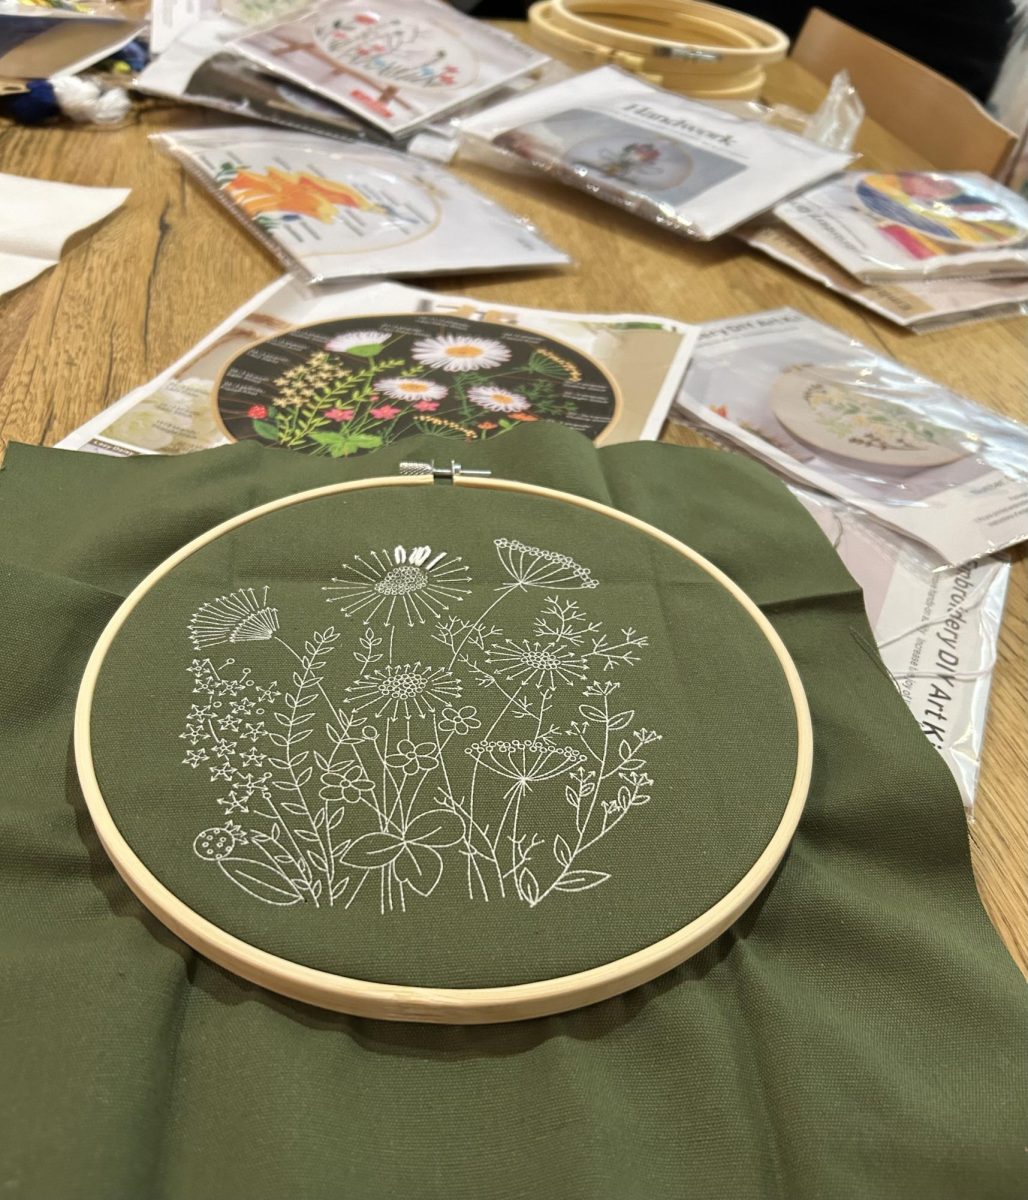 An+embroidery+project+in+progress+on+a+table+at+W%26B